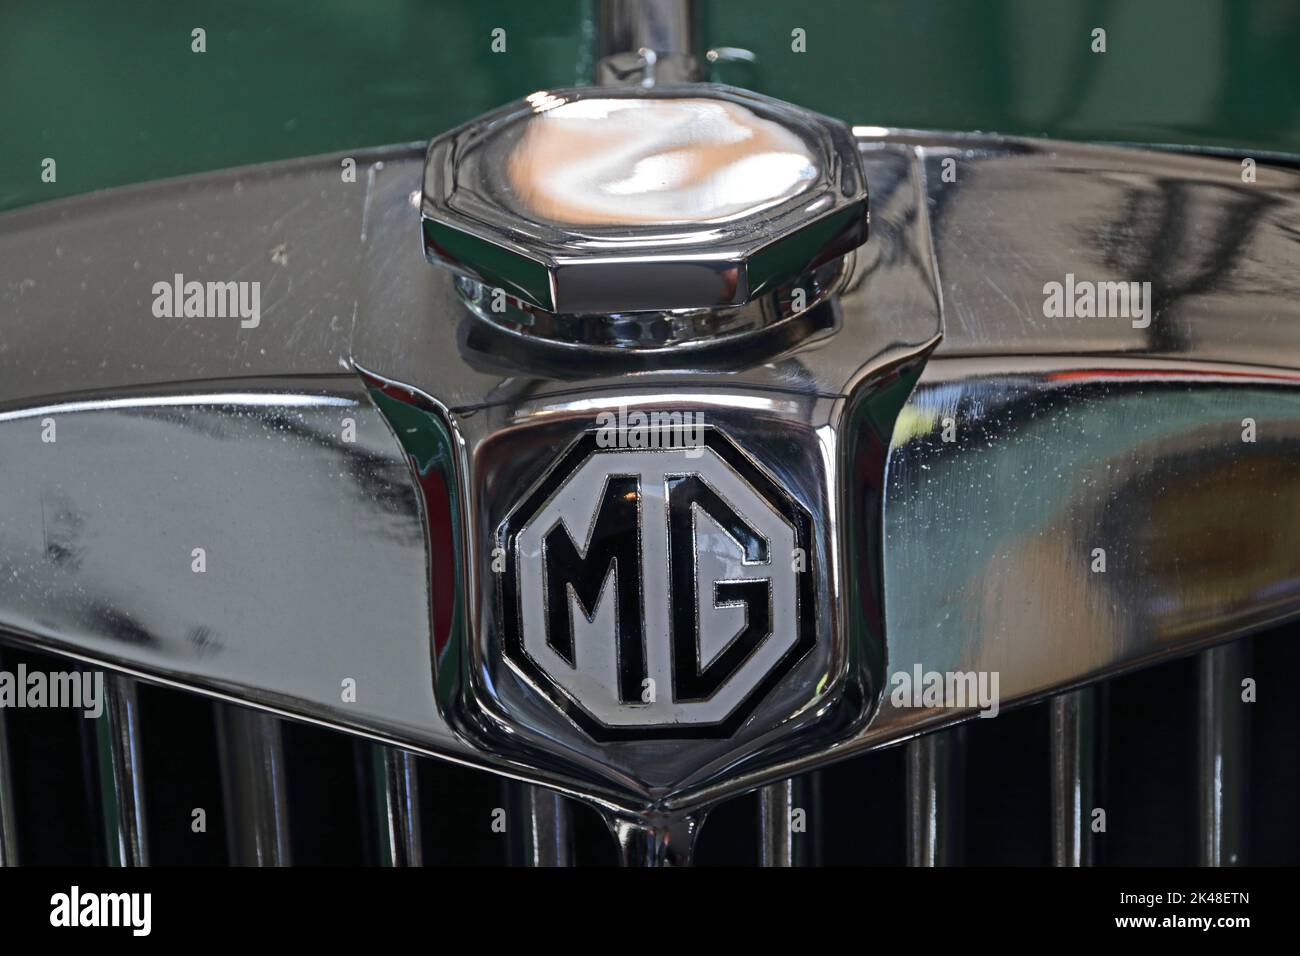 MG car badge on top of radiator grille Stock Photo